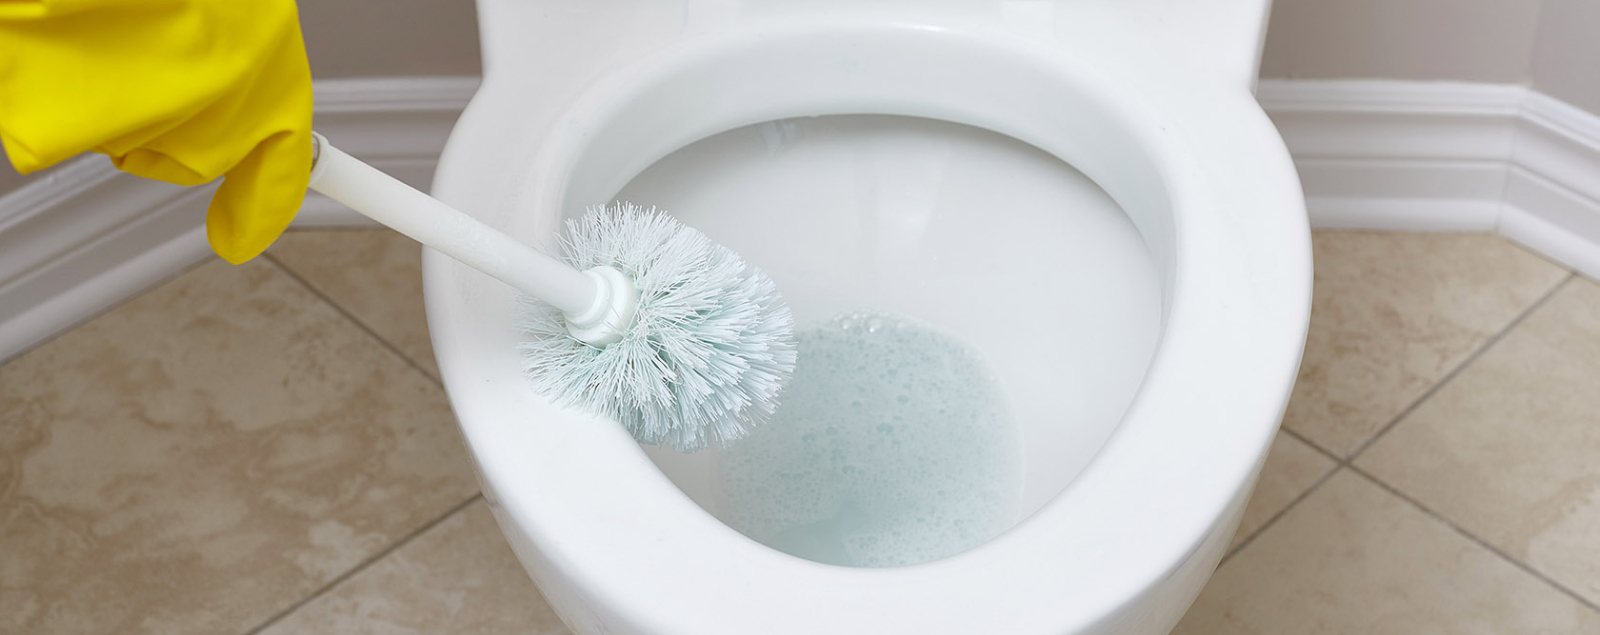 How to clean a toilet the right way